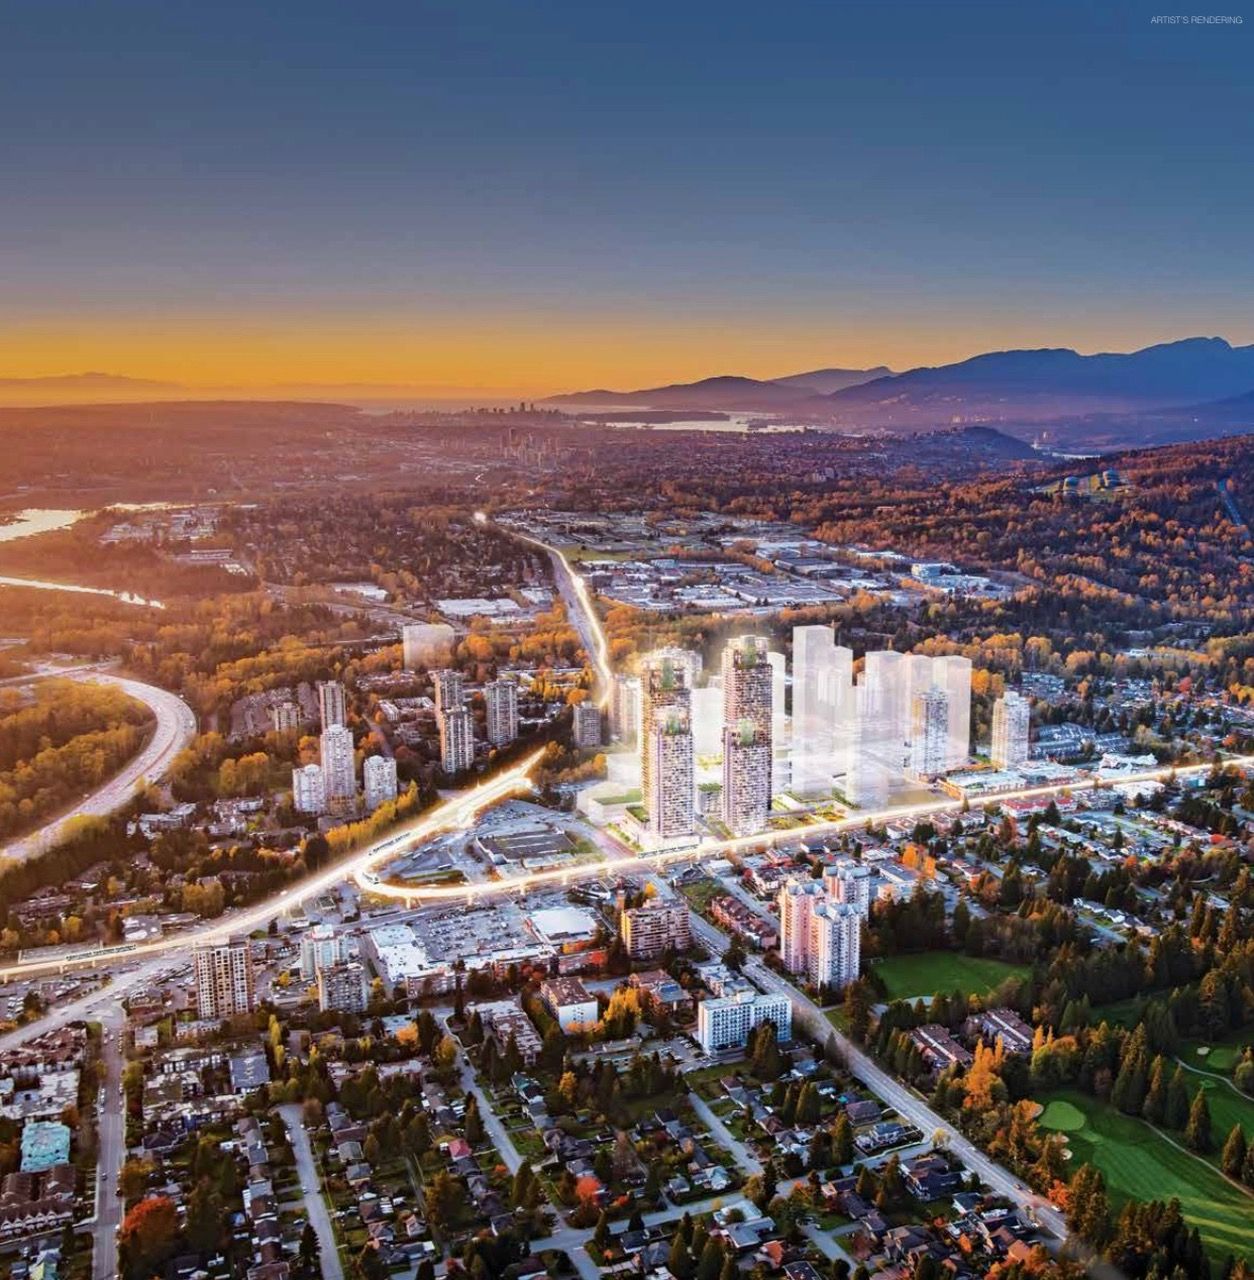 Amazing City of Lougheed project - A unique community coming soon